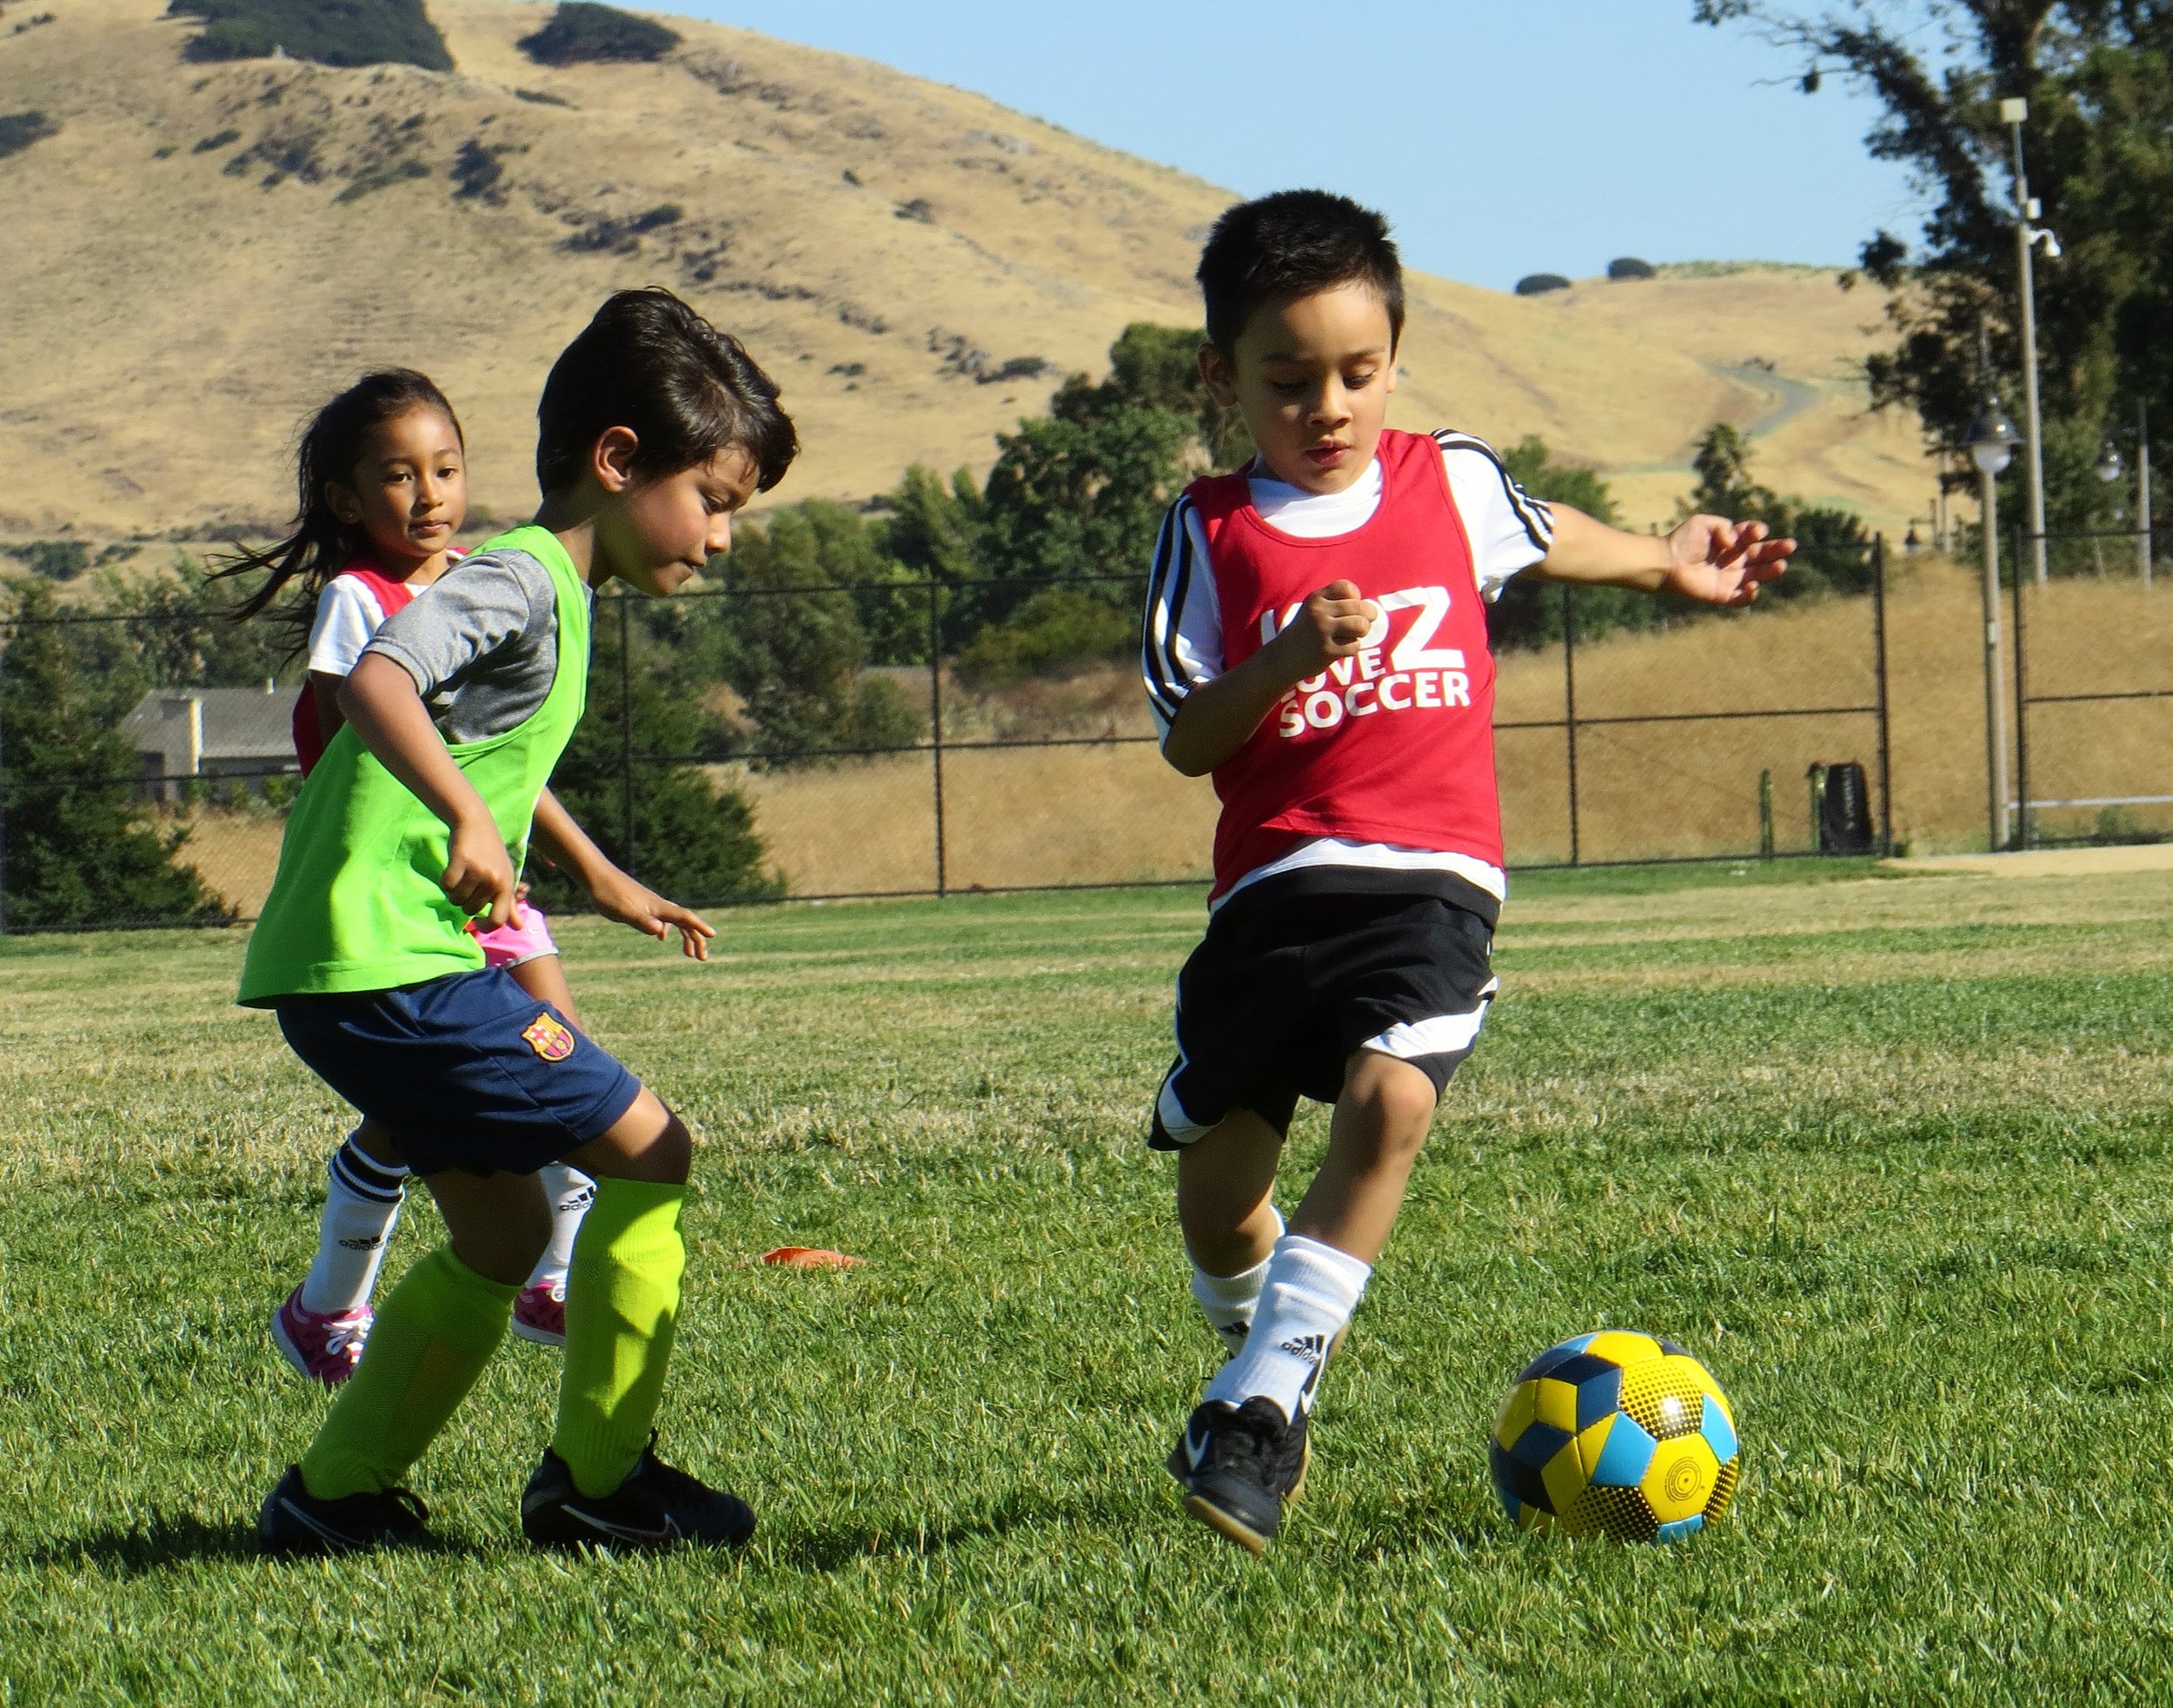 Three children playing soccer on a field